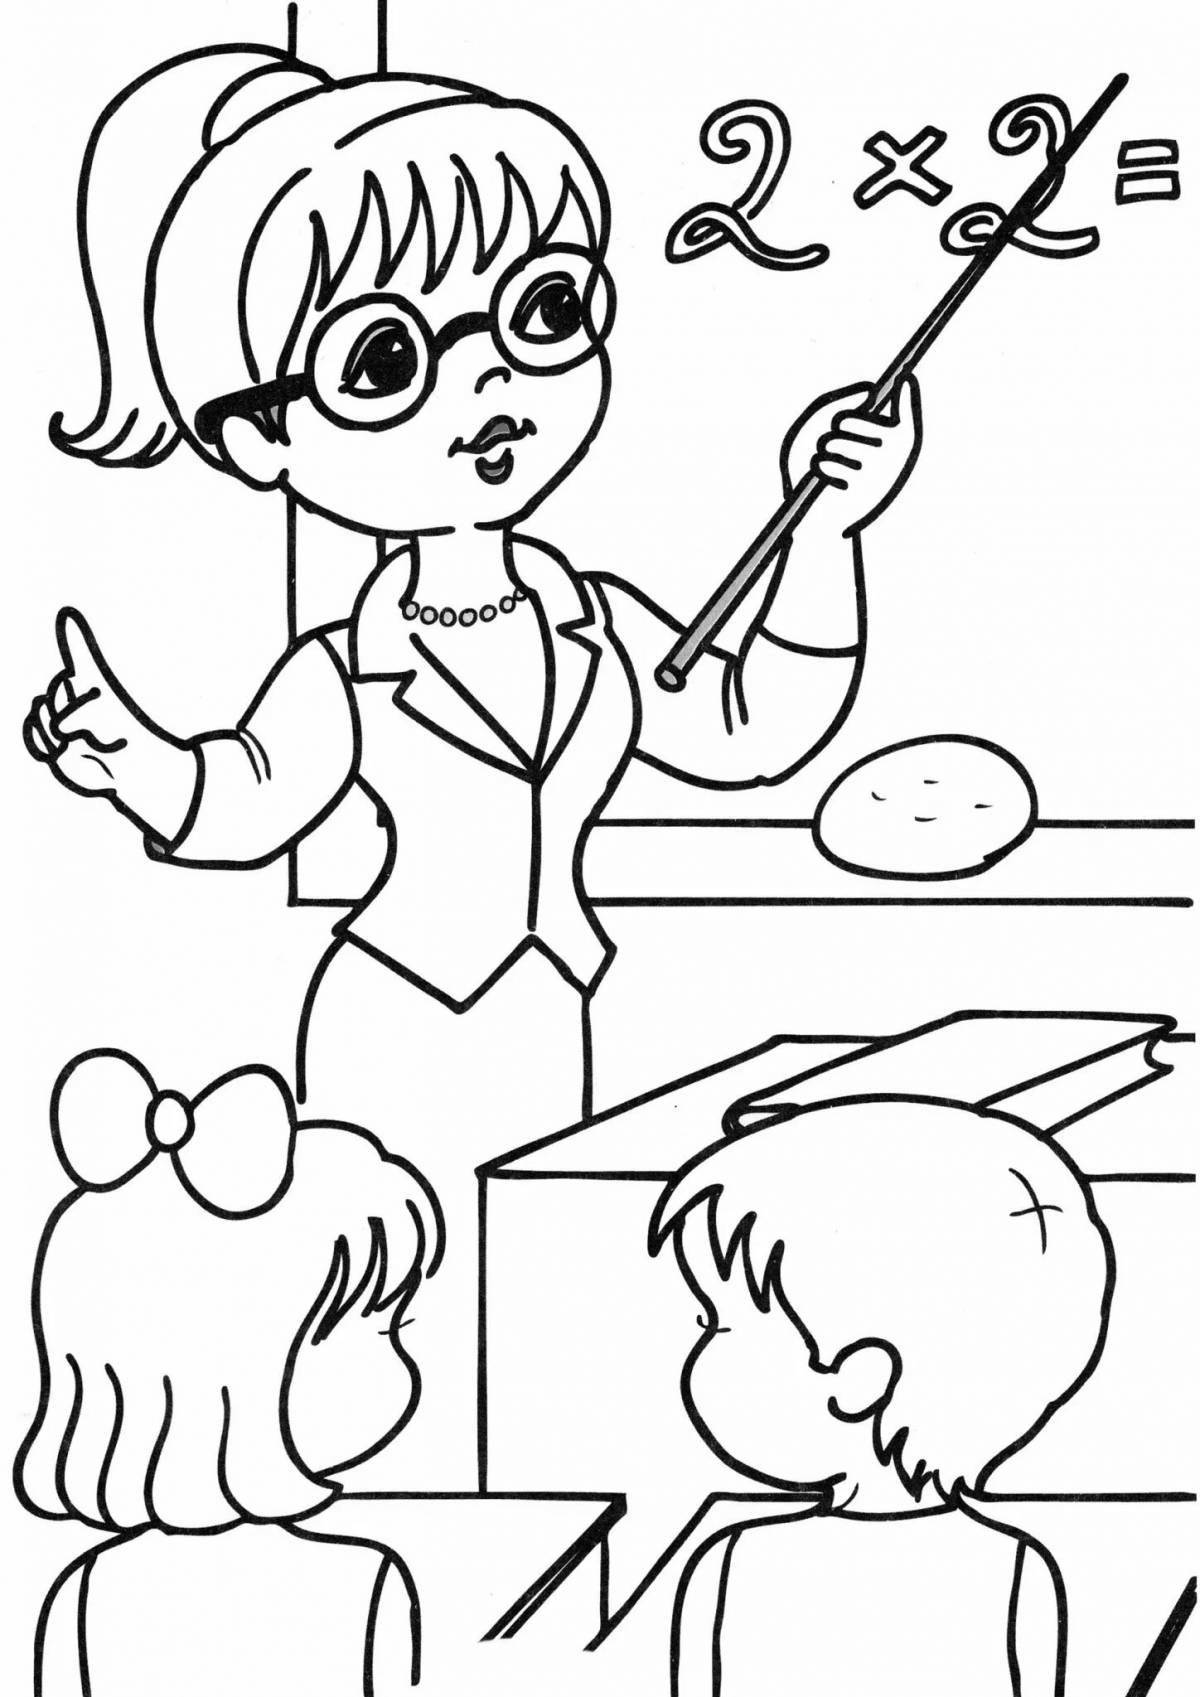 Colorful job coloring pages for dreamers